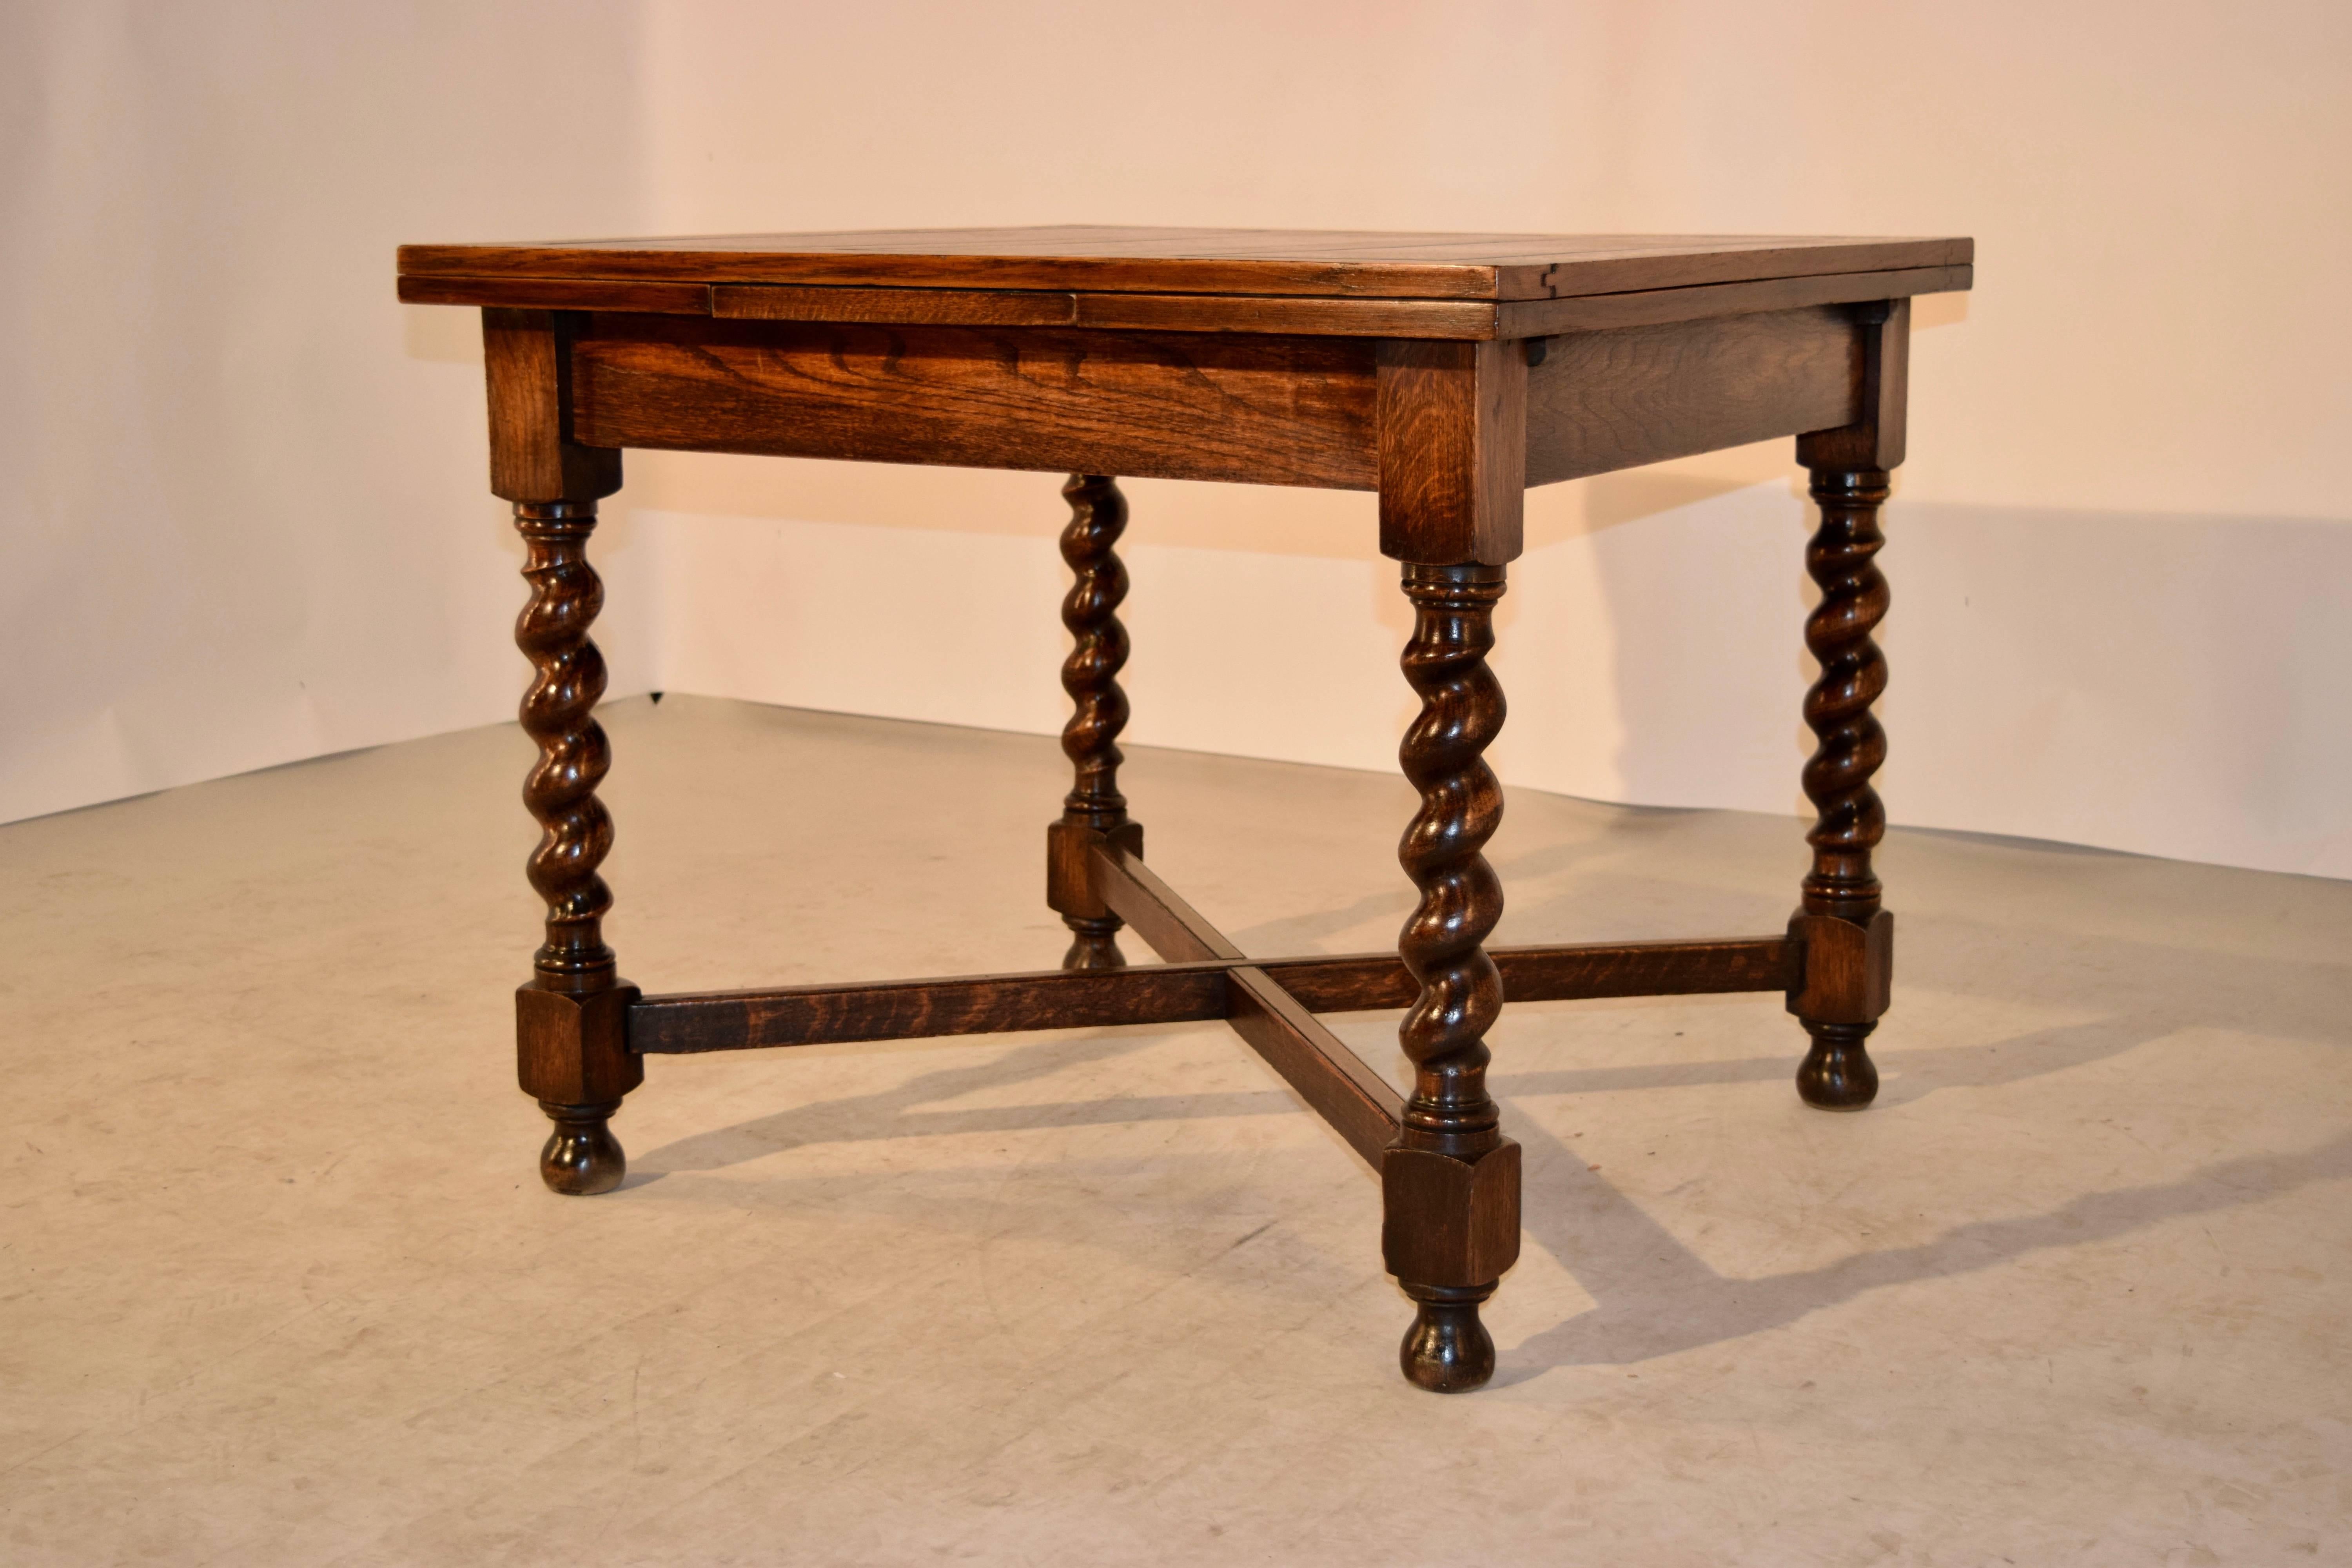 English oak draw-leaf table from England, circa 1900. The top and leaves are paneled and follow down to a simple apron, supported on thickly turned barley twist legs, joined by cross stretchers and raised on turned feet. The top open measures 59.75